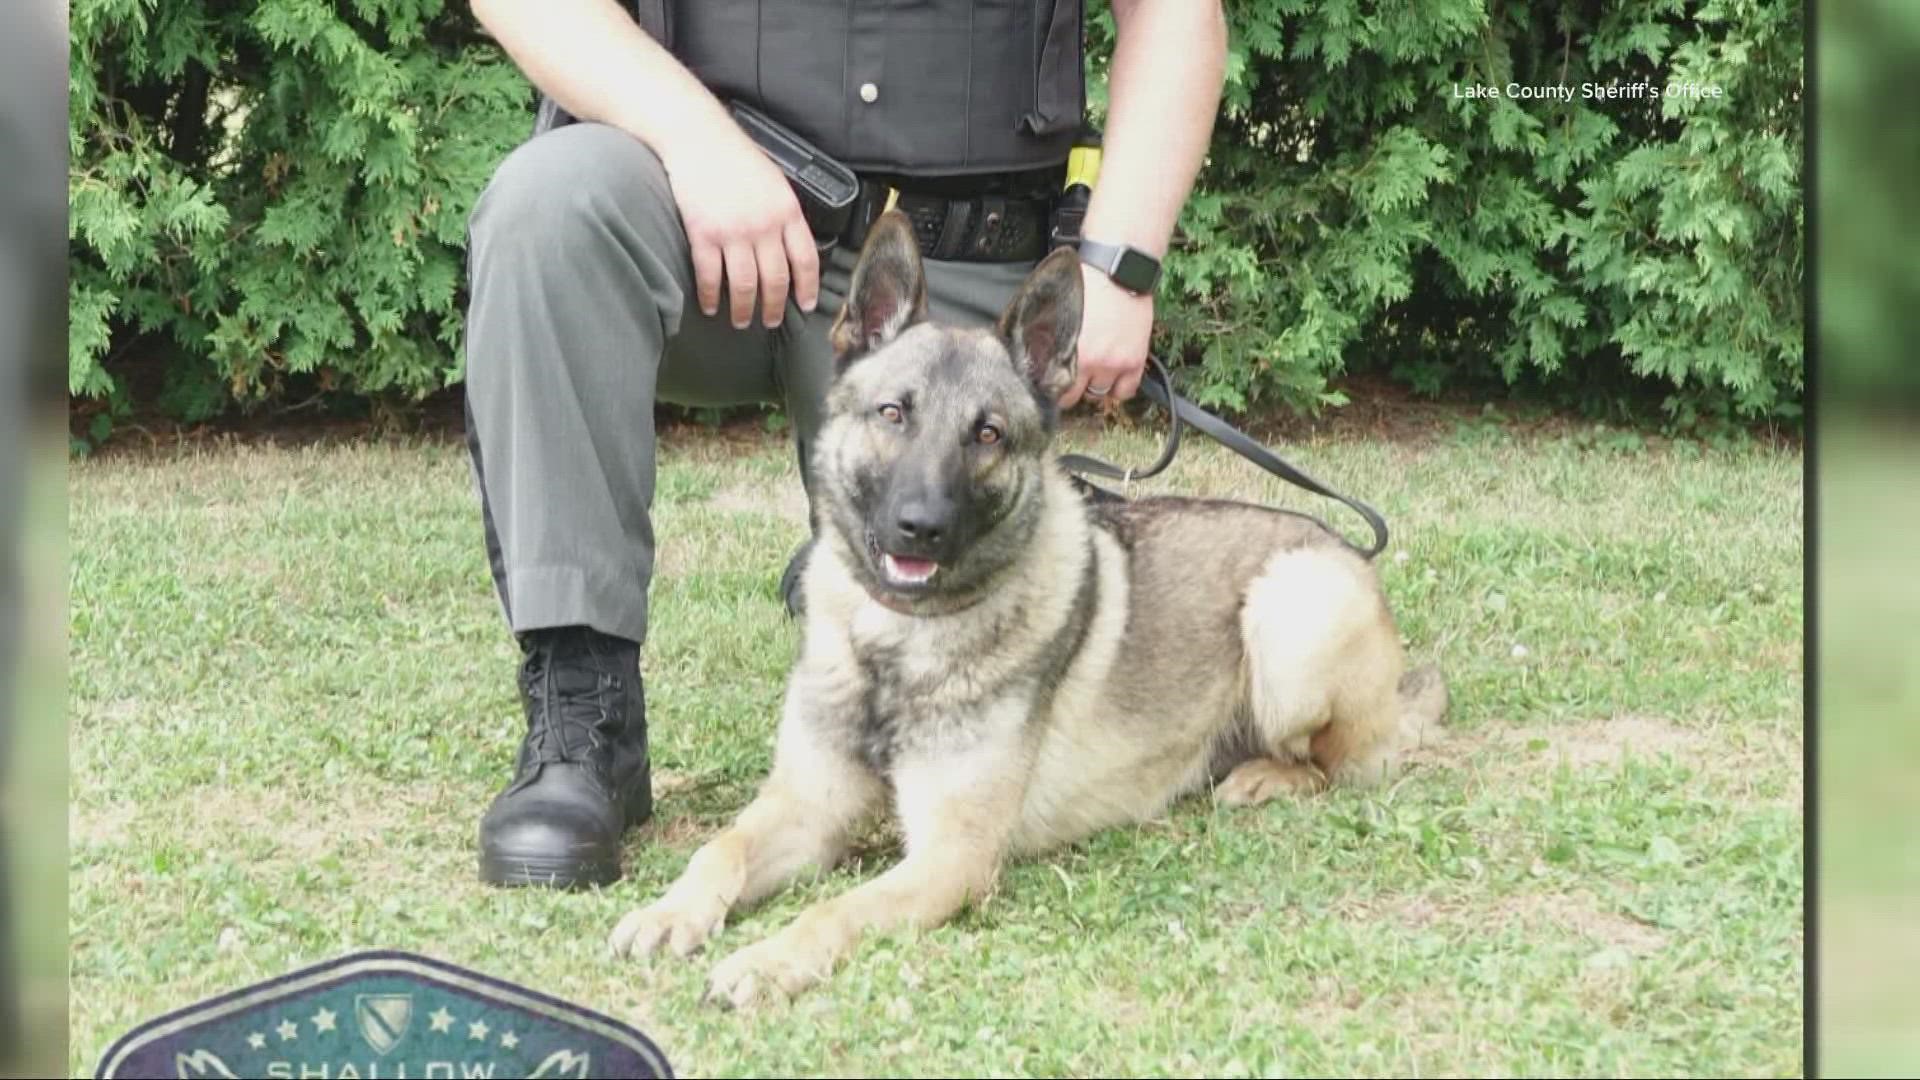 Ryker has helped make multiple drug-related arrests in his first few days on the job.